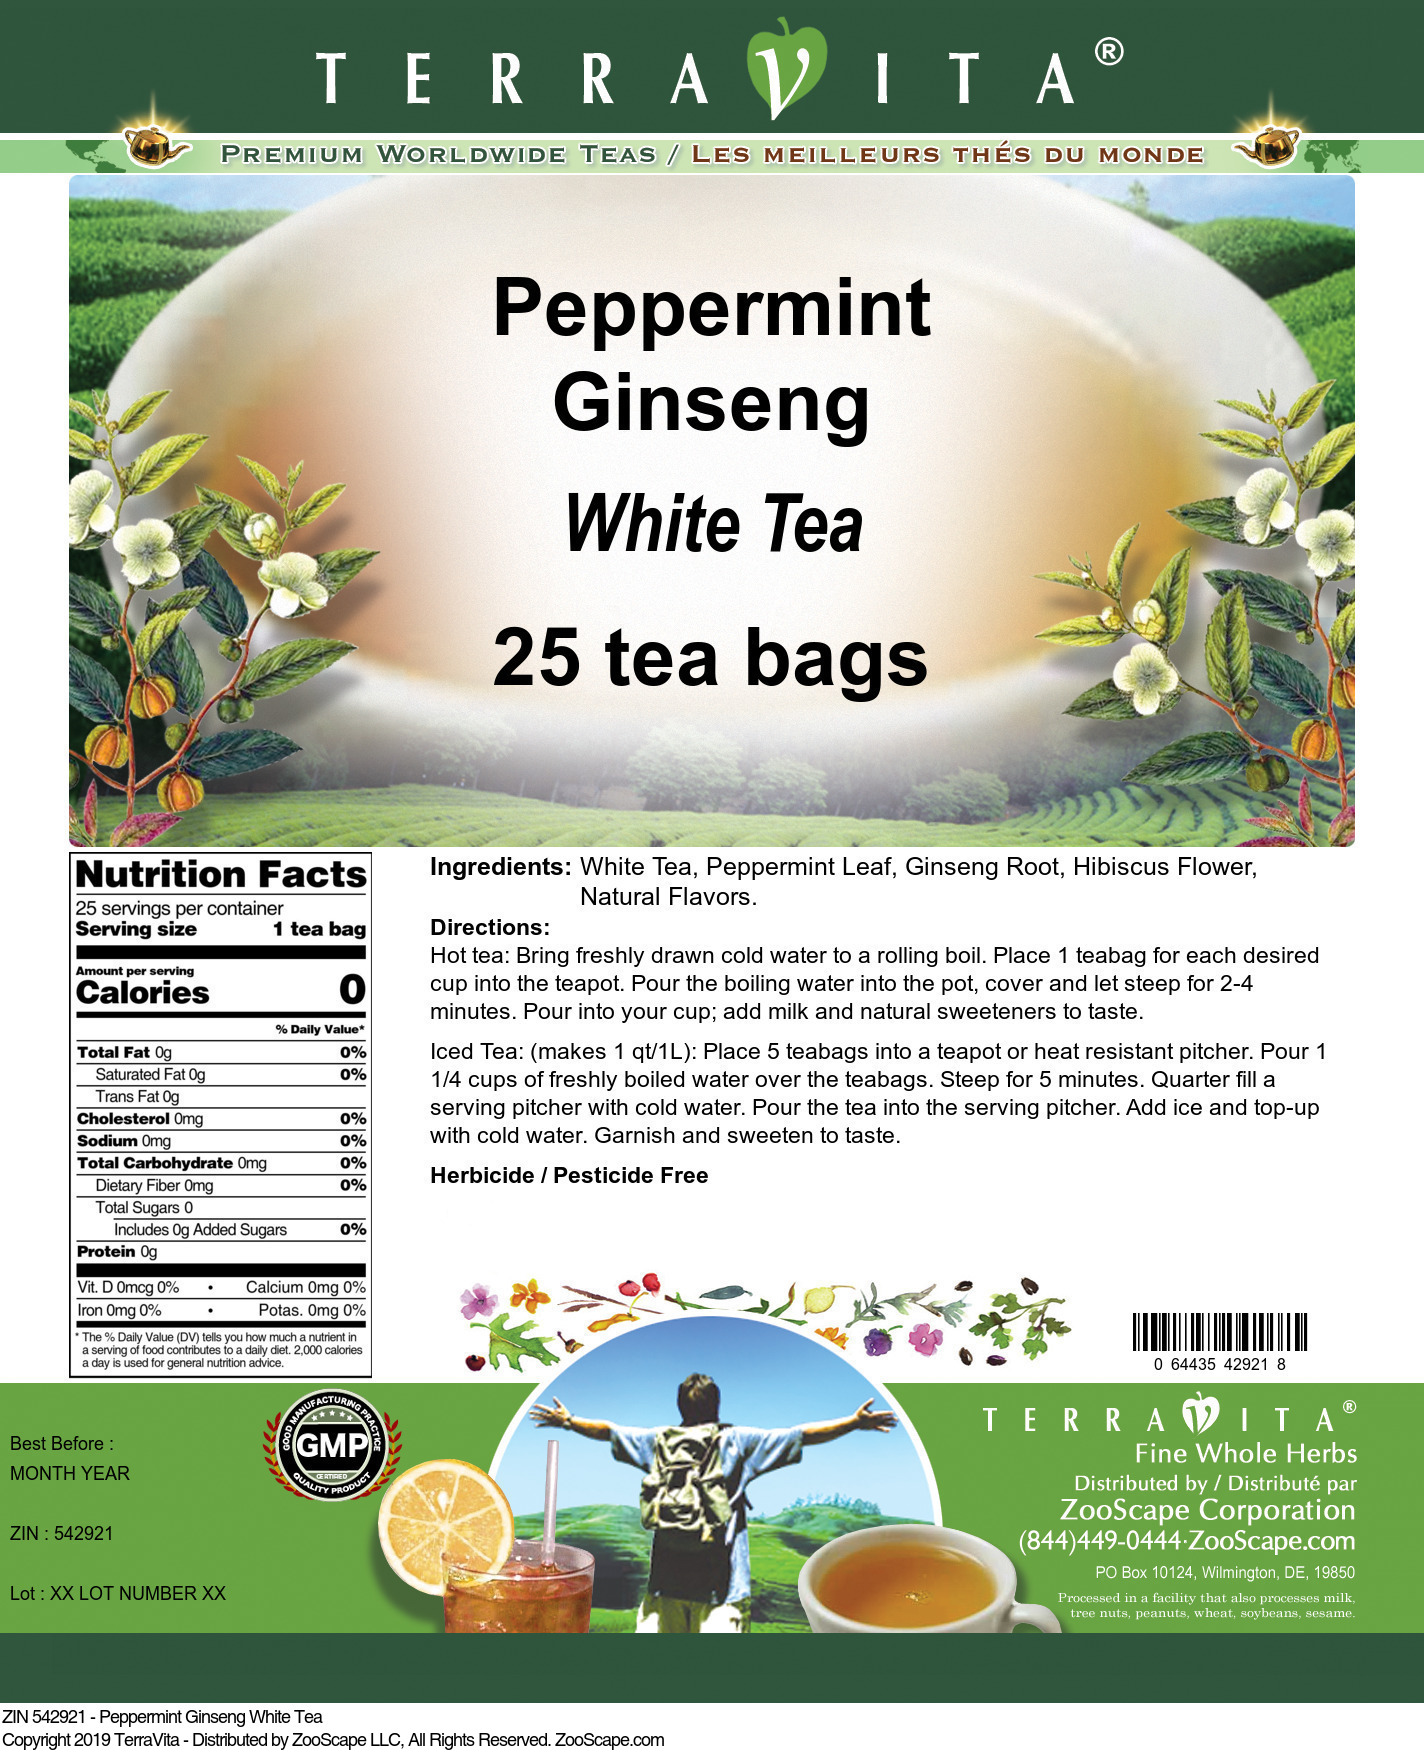 Peppermint Ginseng White Tea - Label